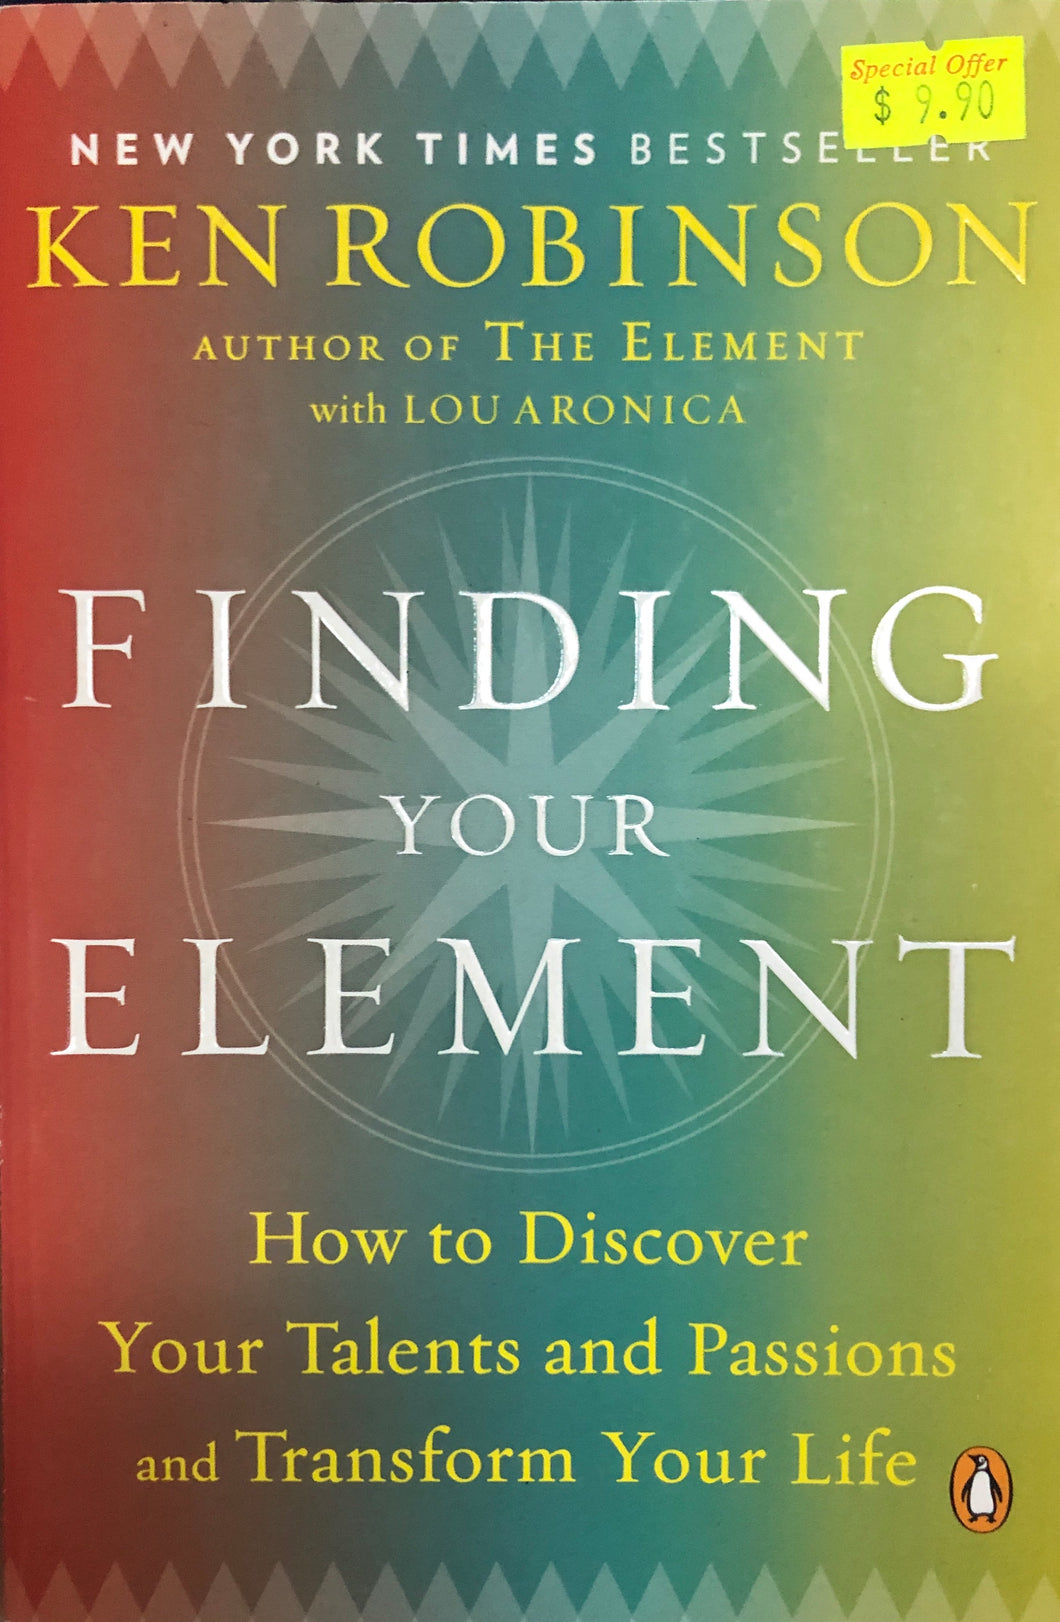 Finding Your Element - Ken Robinson